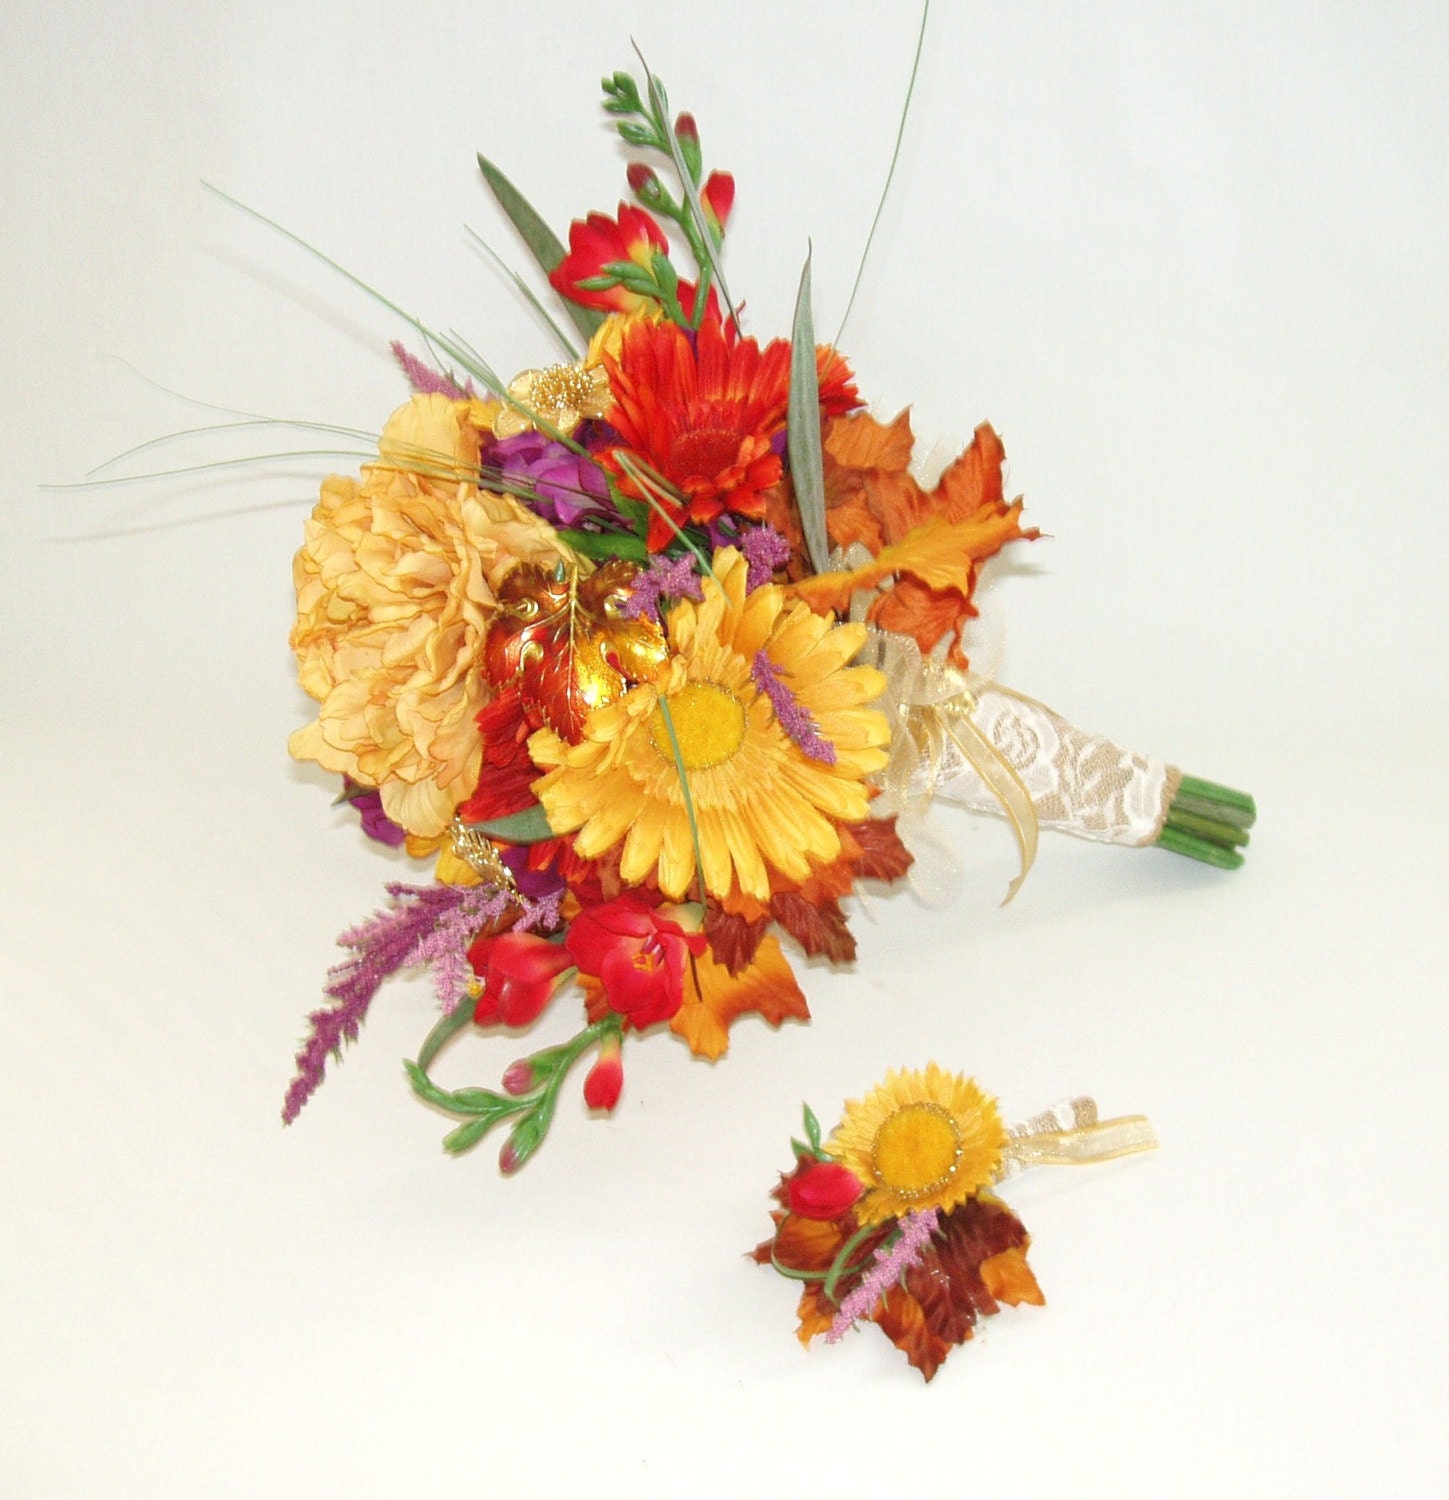 SAMPLE SALE: Silk Flower,Red, Gold, BROOCH Bouquet Set Boutonniere, Burlap Handle, Gold Tone Brooches, Country, Rustic, Ready To Ship